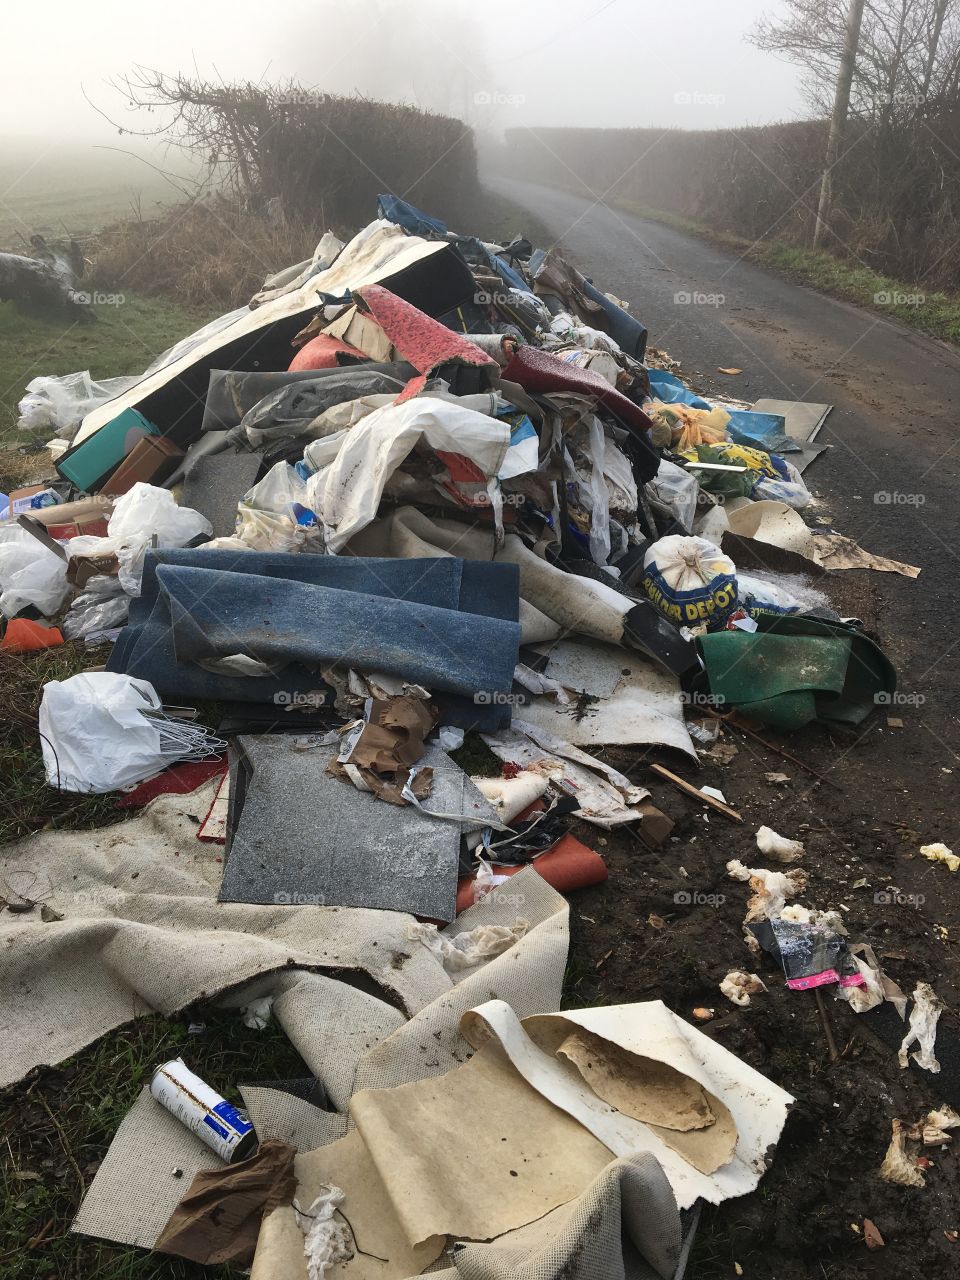 Fly tip cleared